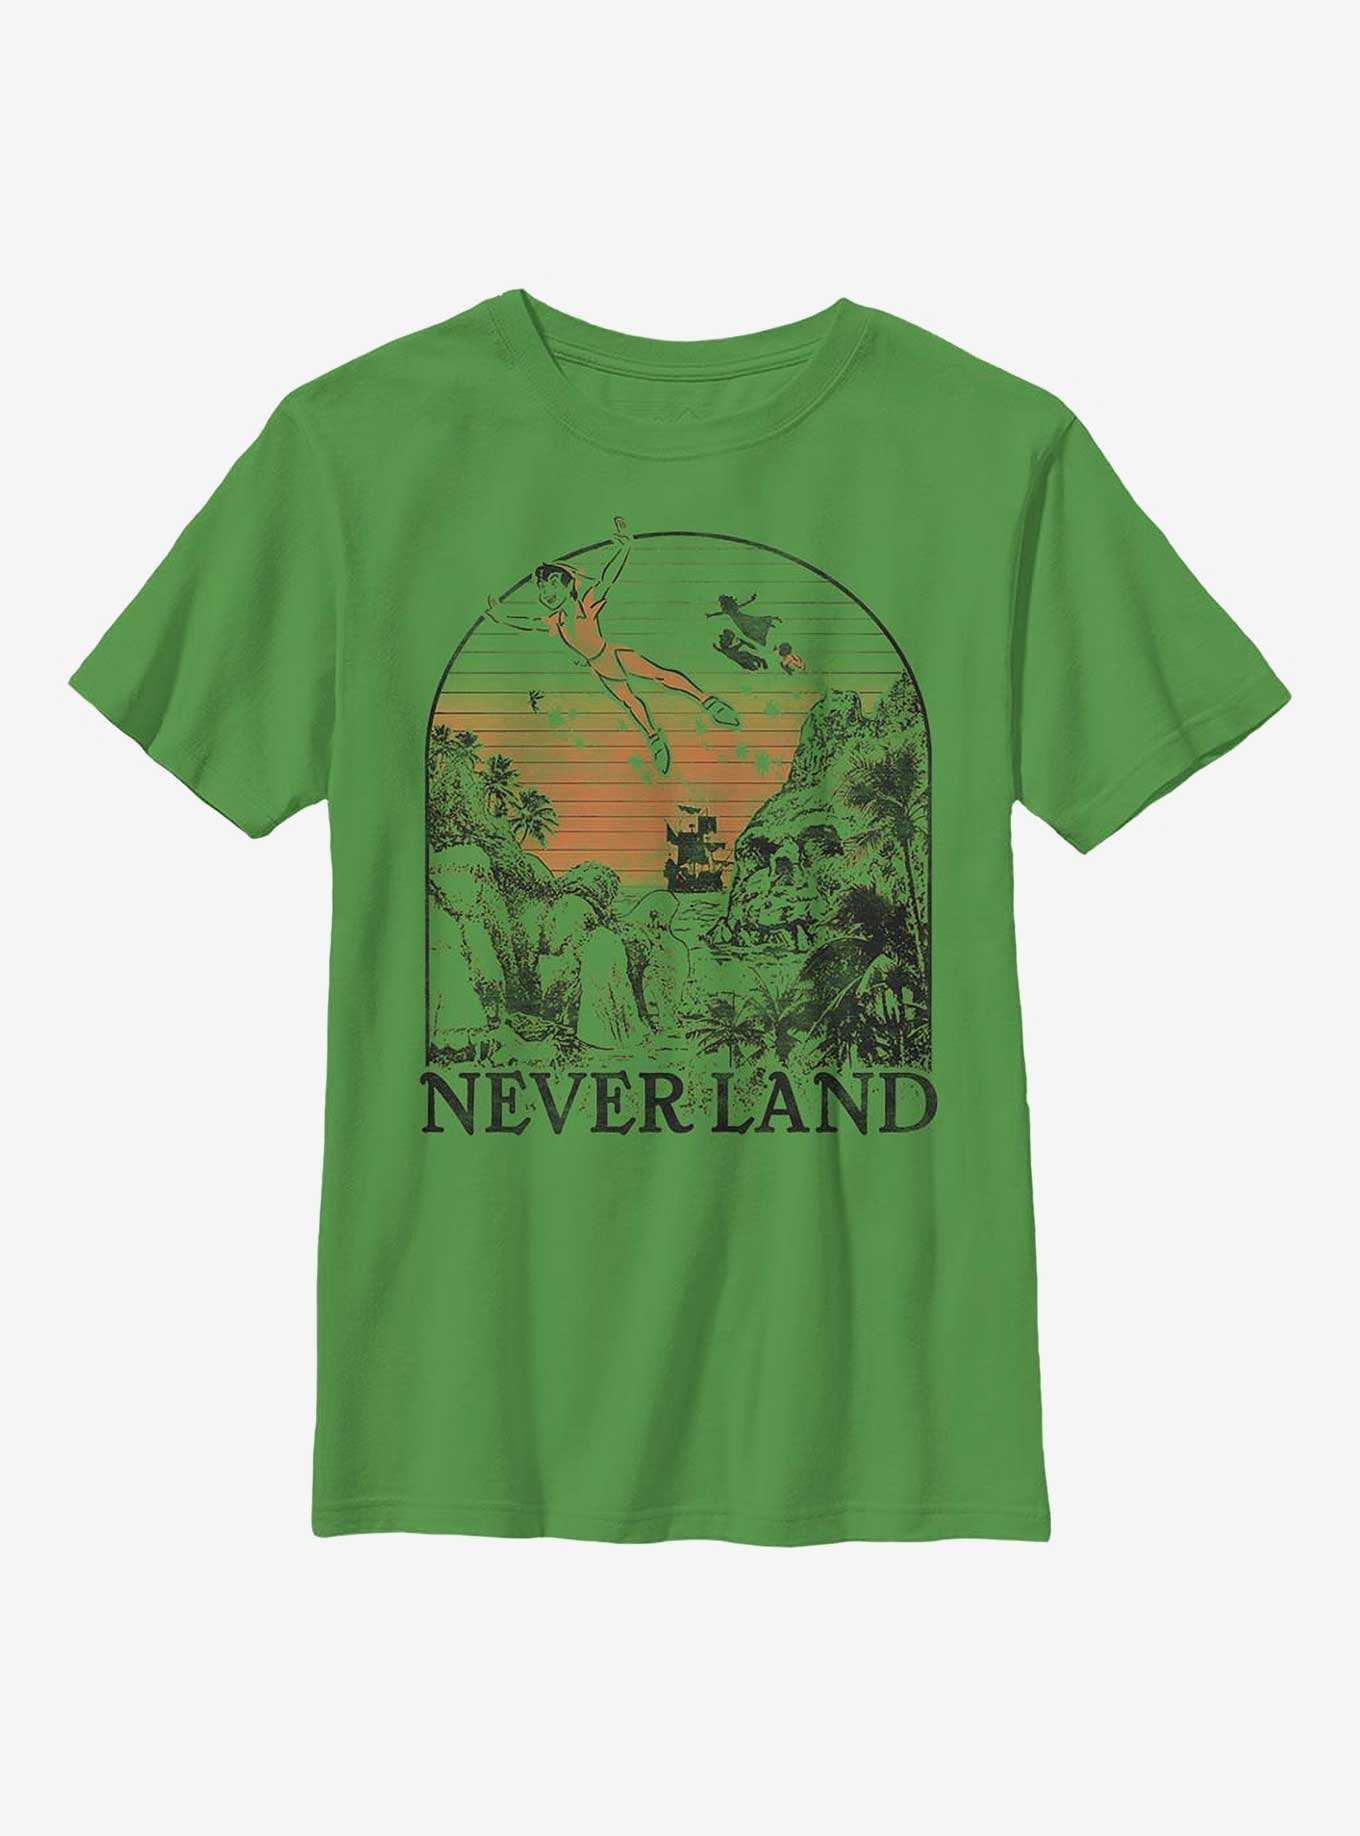 OFFICIAL Peter Pan Tees & Merchandise | BoxLunch